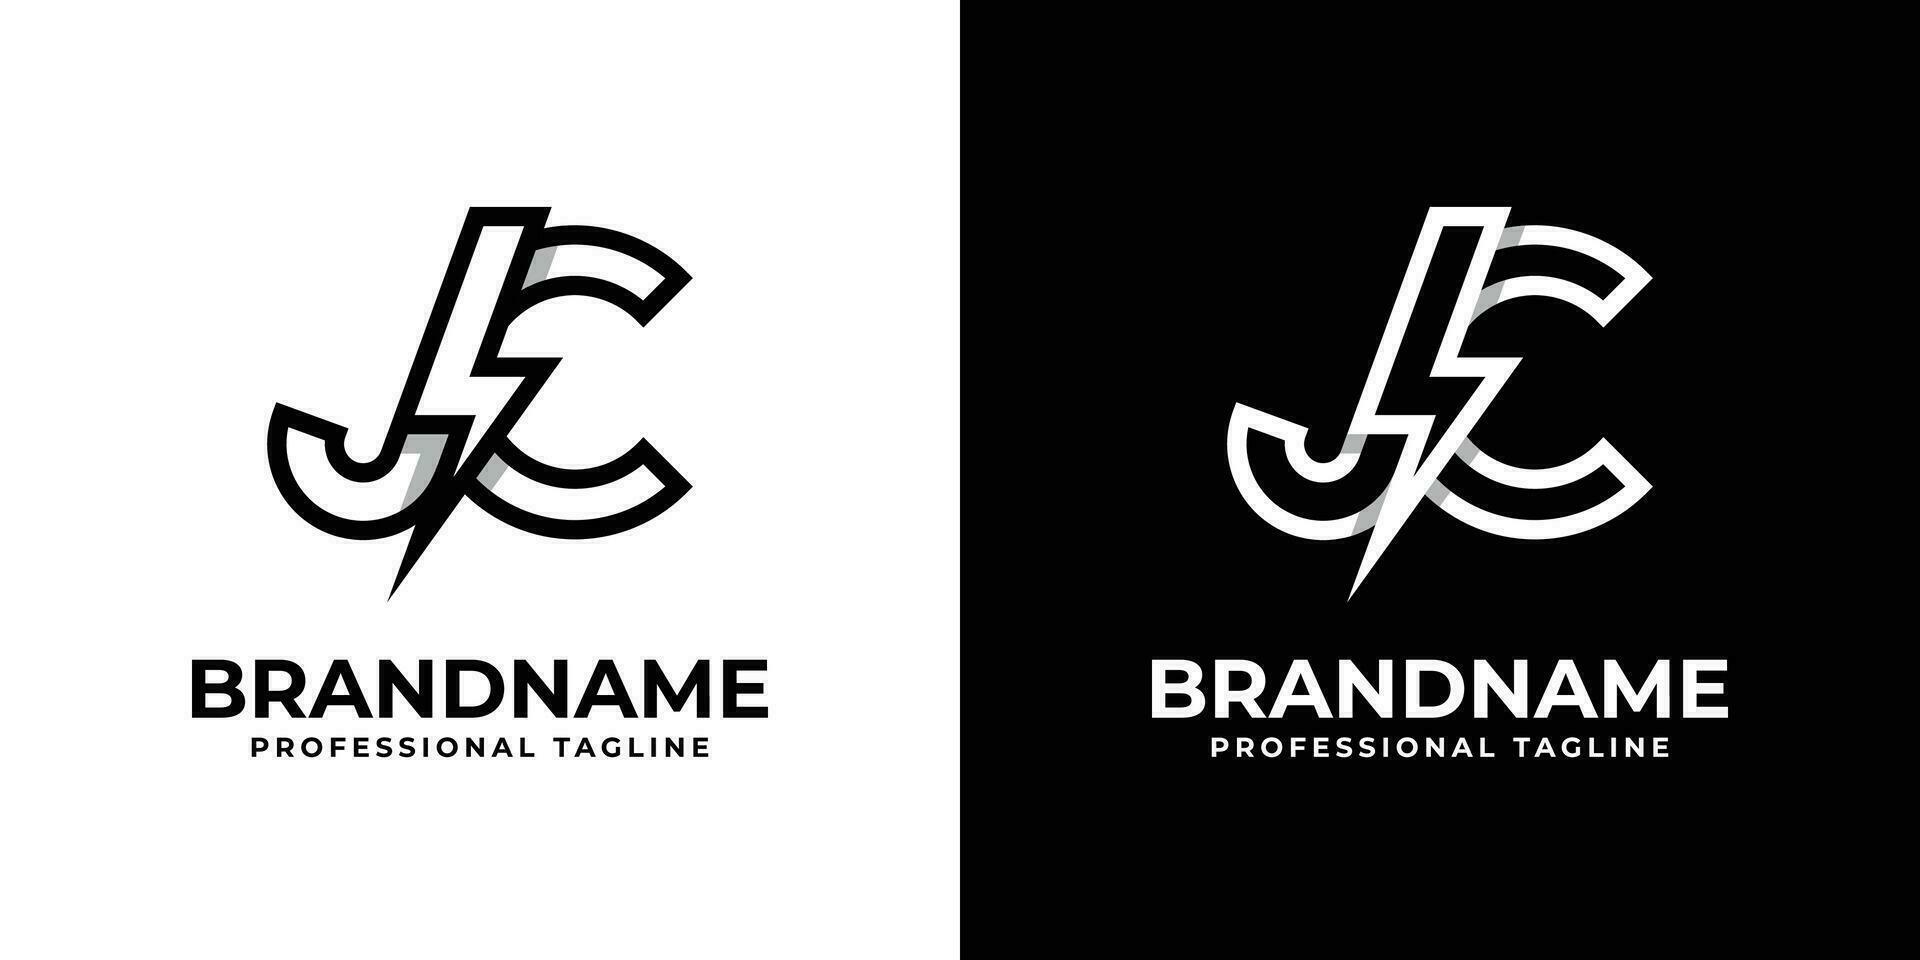 Letter JC Thunderbolt Logo, suitable for any business with JC or CJ initials. vector